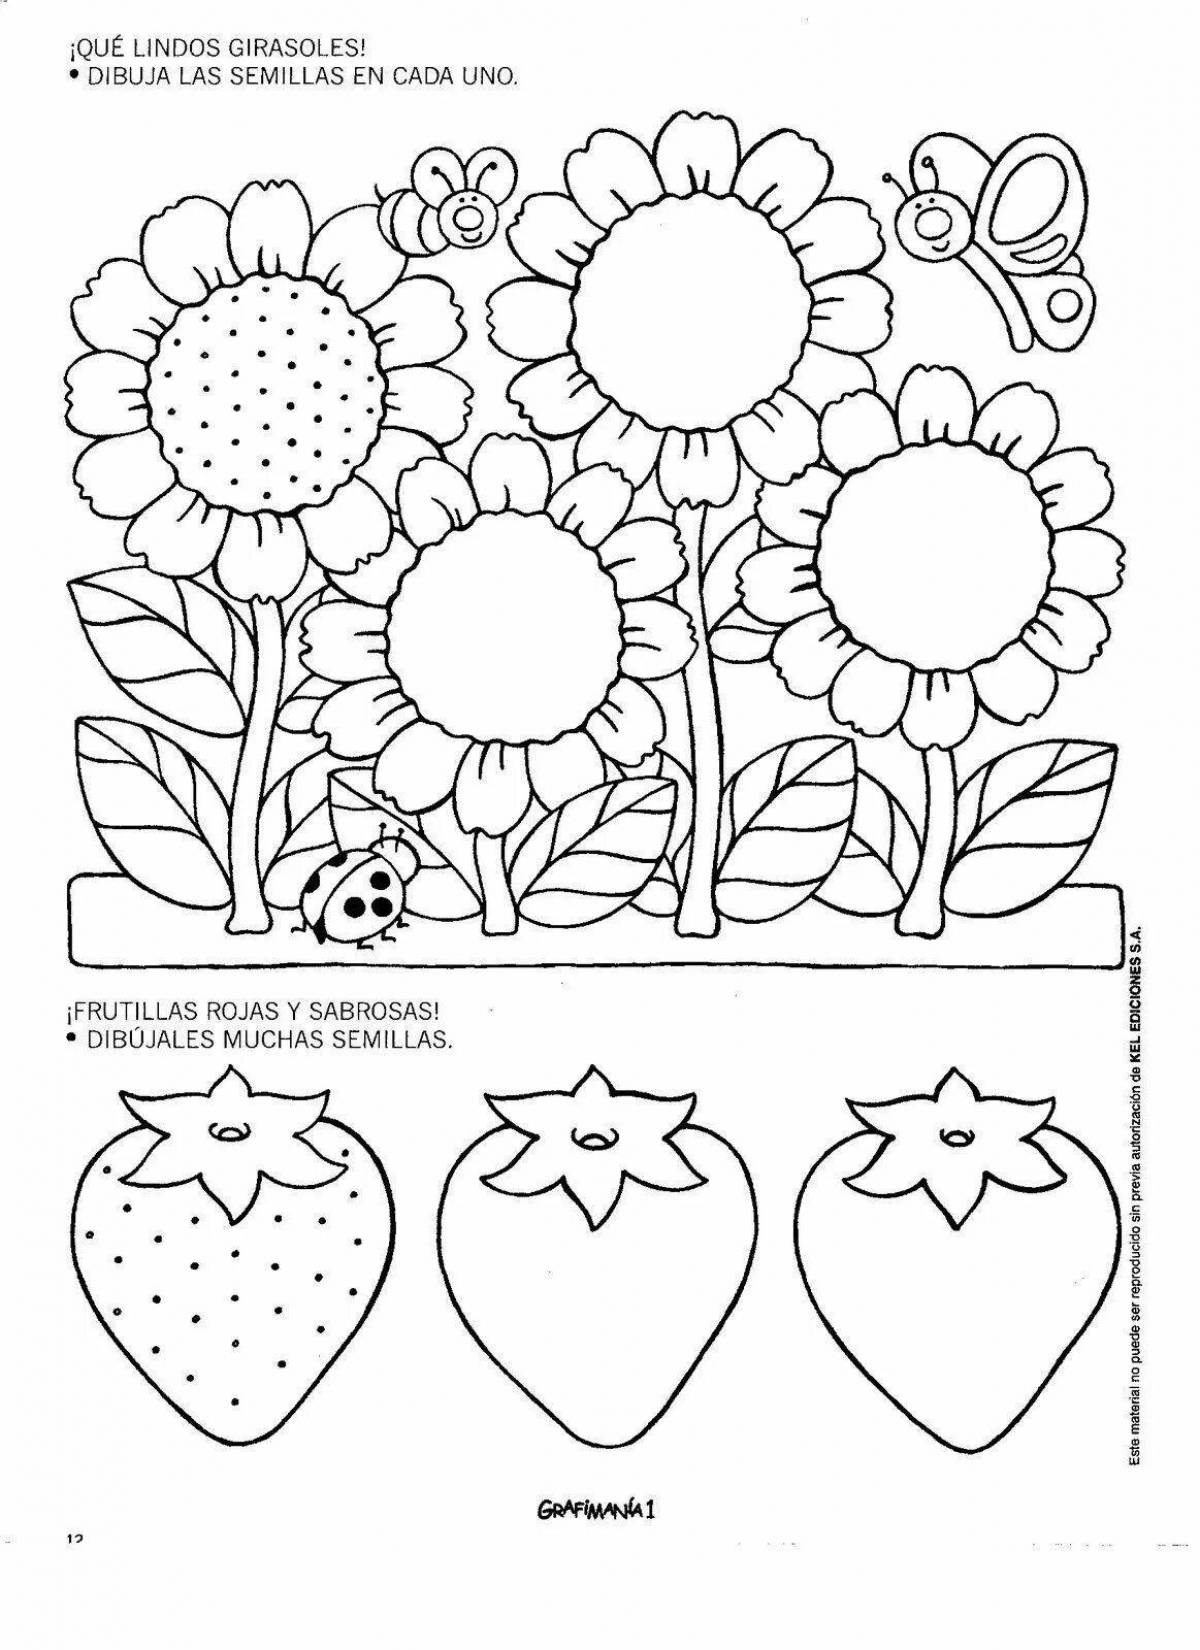 Stimulating coloring book to develop attention